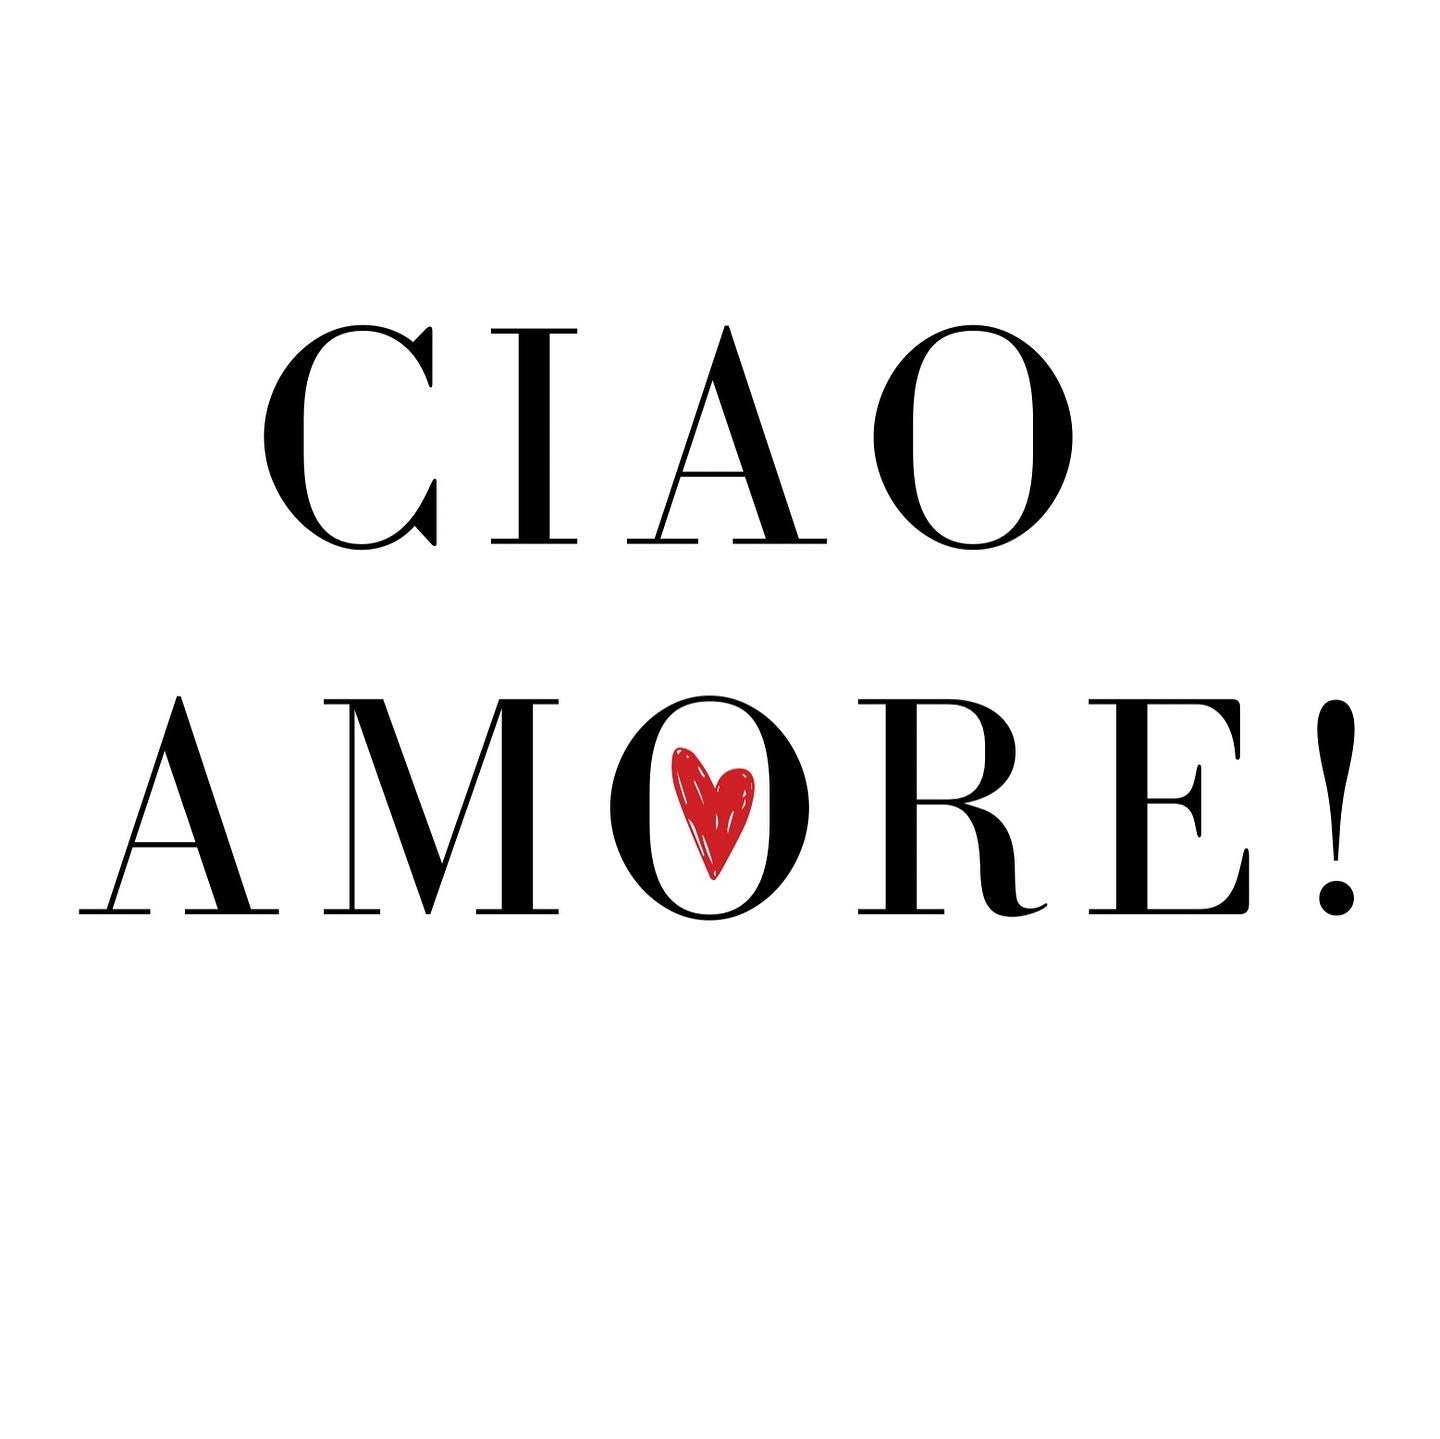 Ciao Amore... - KARTE BY SARA BECKER - THE LABEL